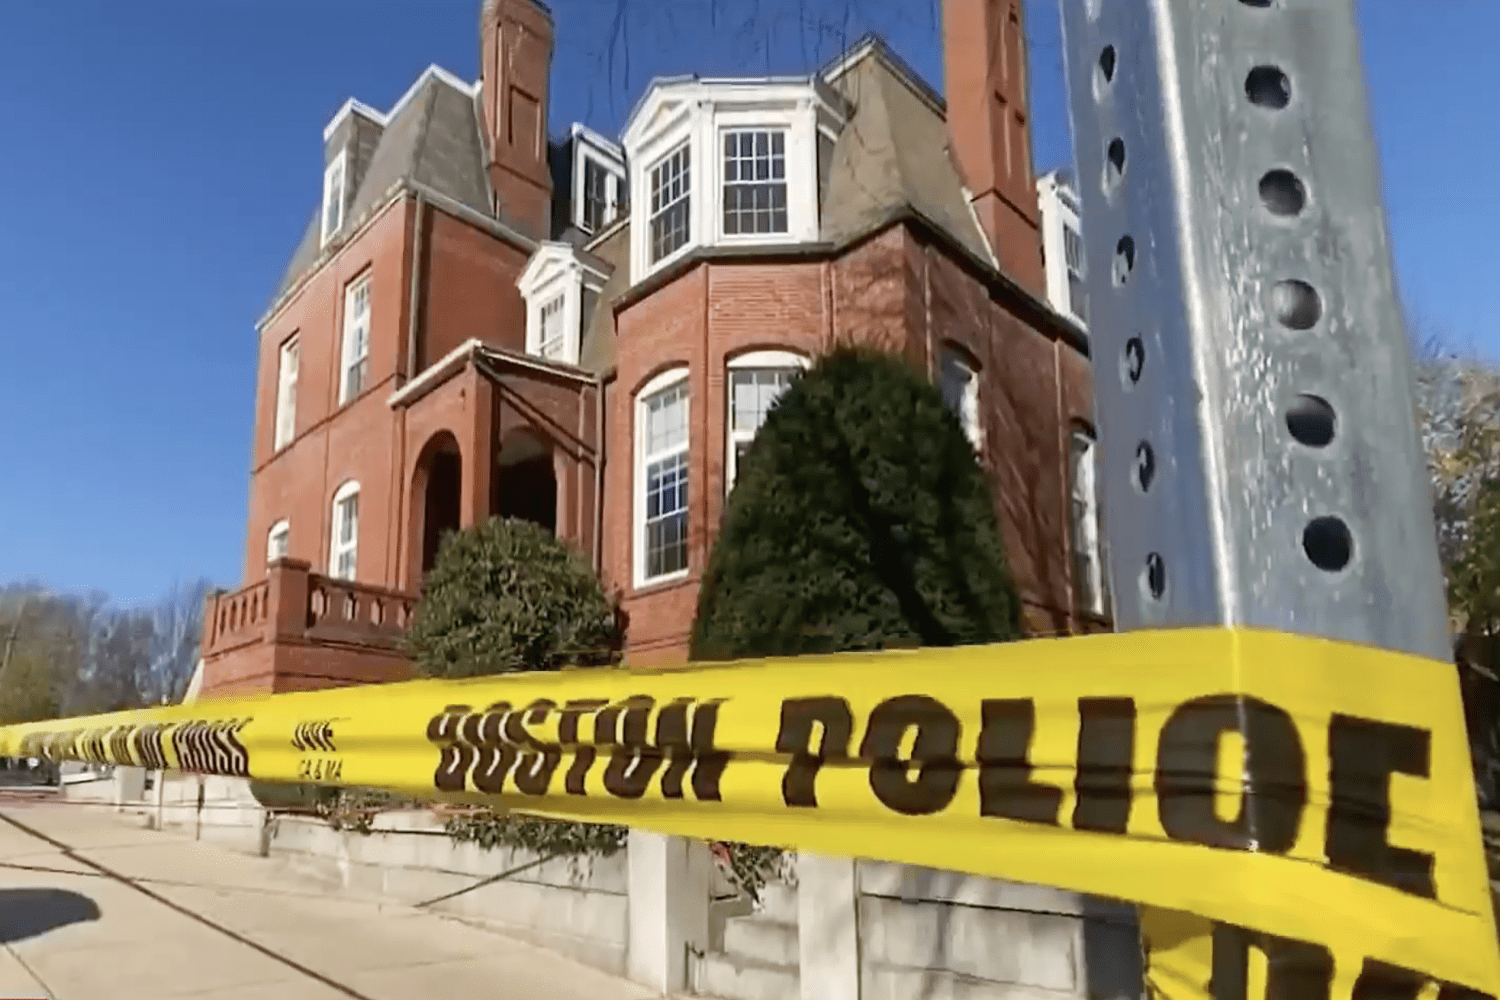 No charges for woman after bodies of 4 babies are found in Boston freezer